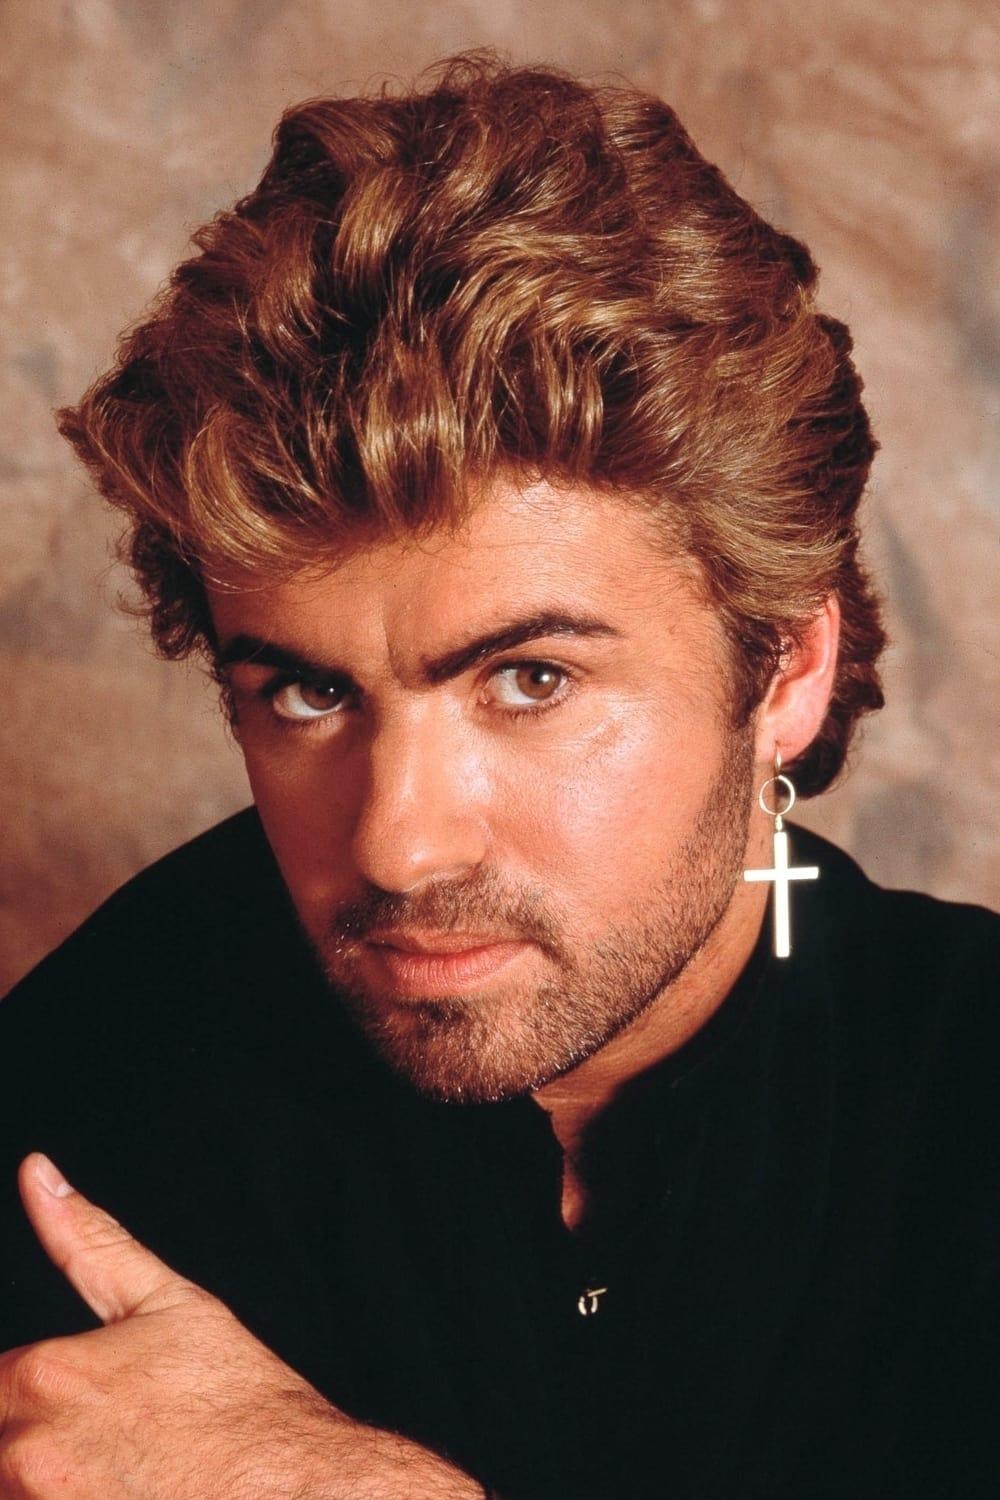 George Michael poster